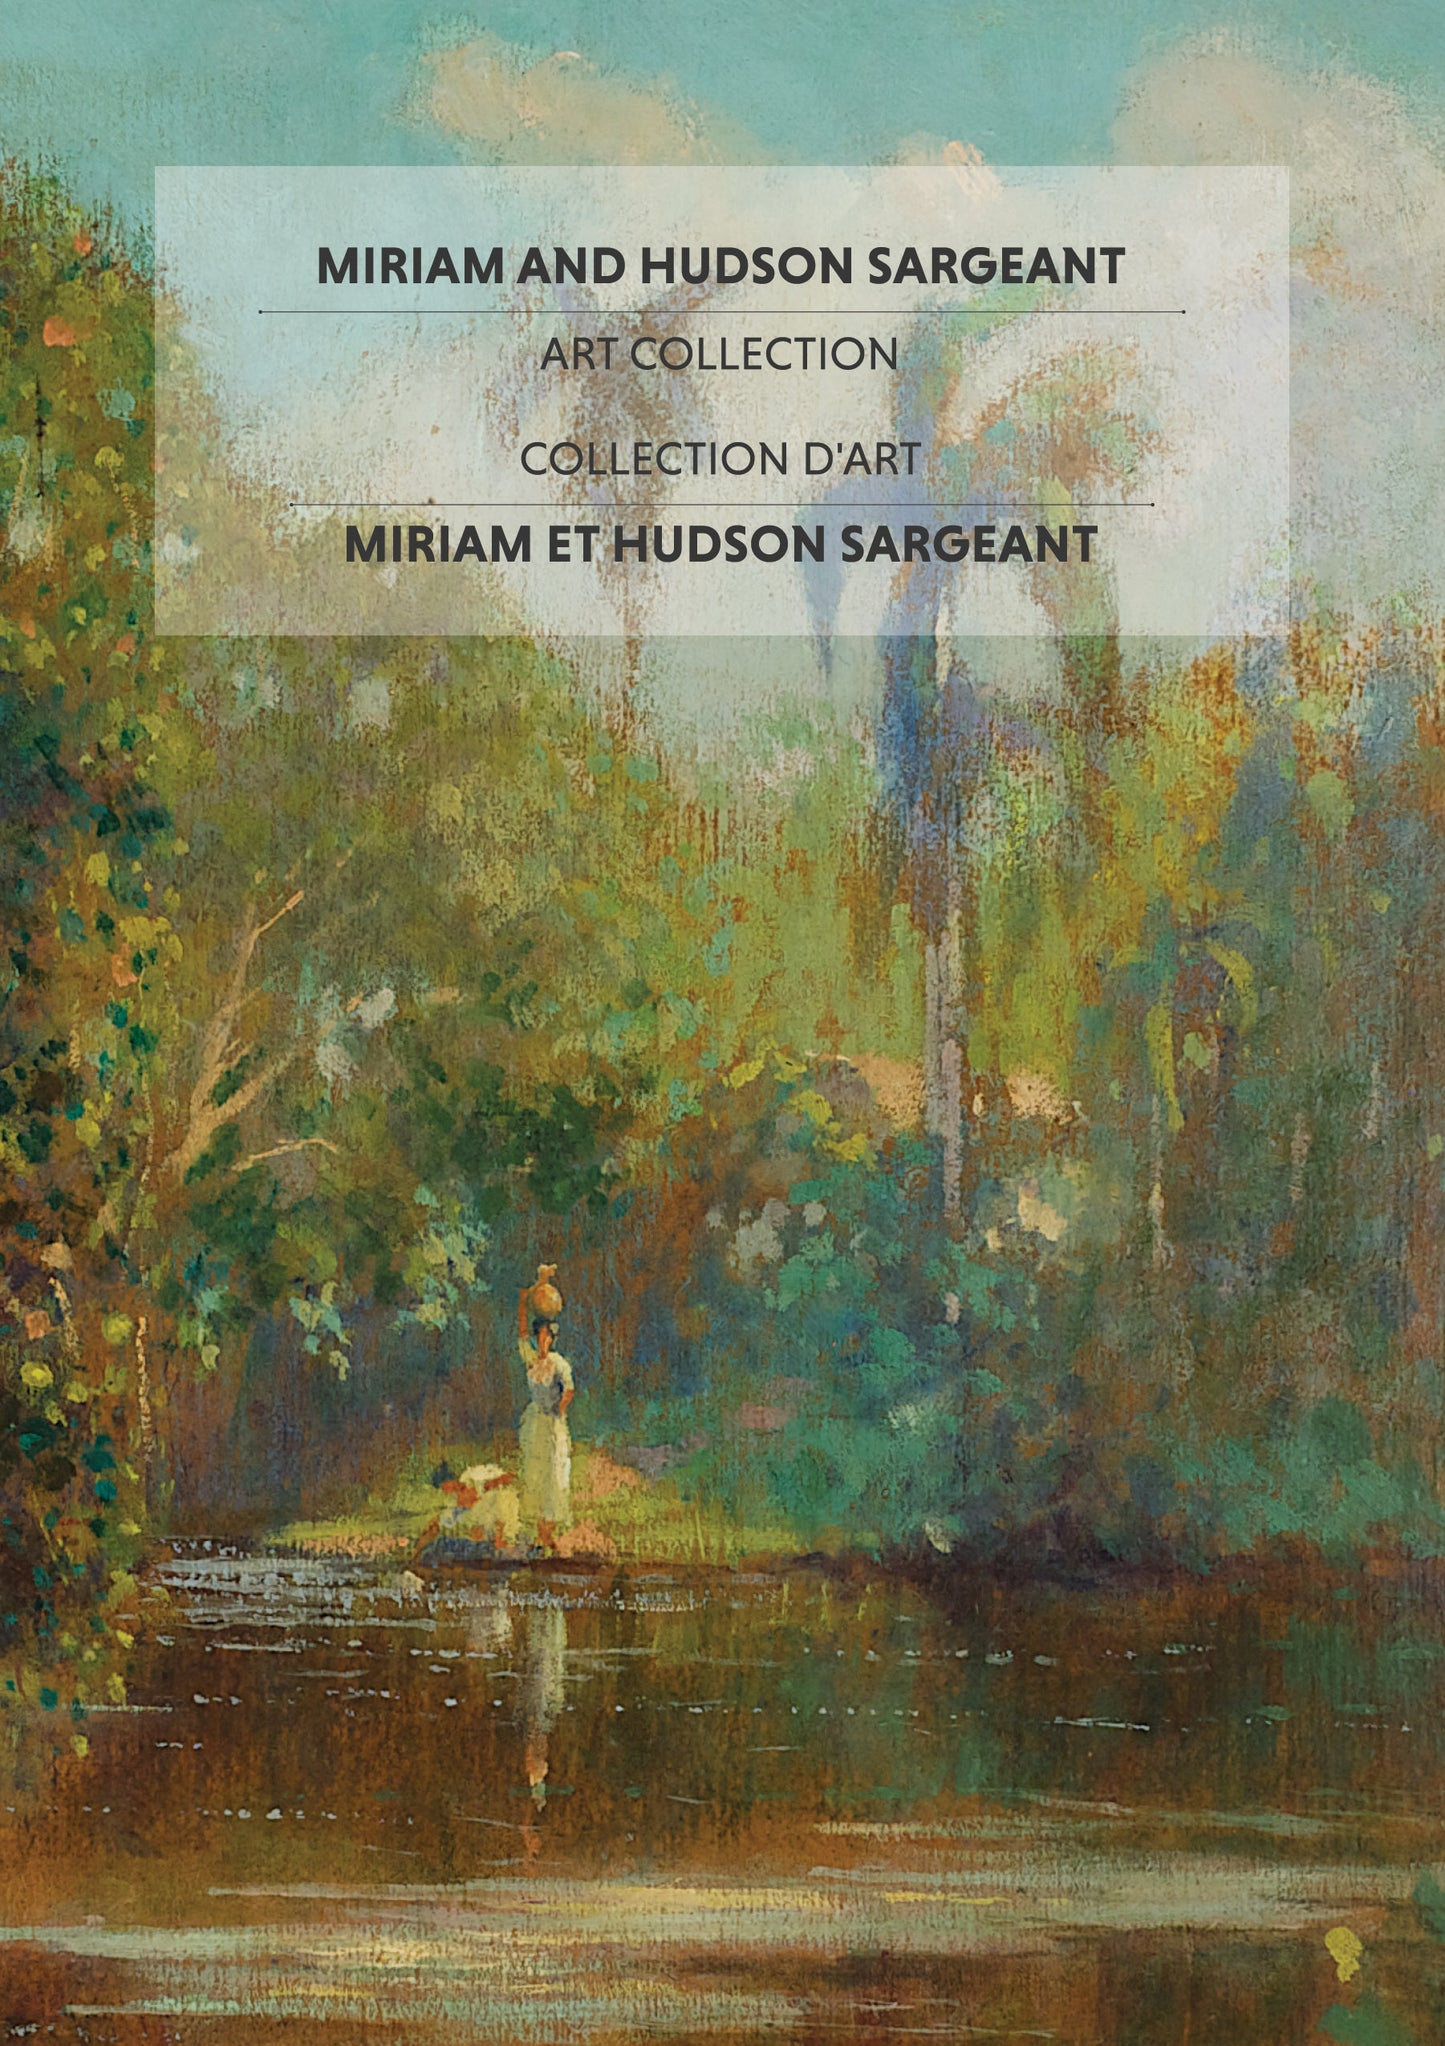 Miriam and Hudson Sargeant Art Collection / Collection d’art Miriam et Hudson Sargeant